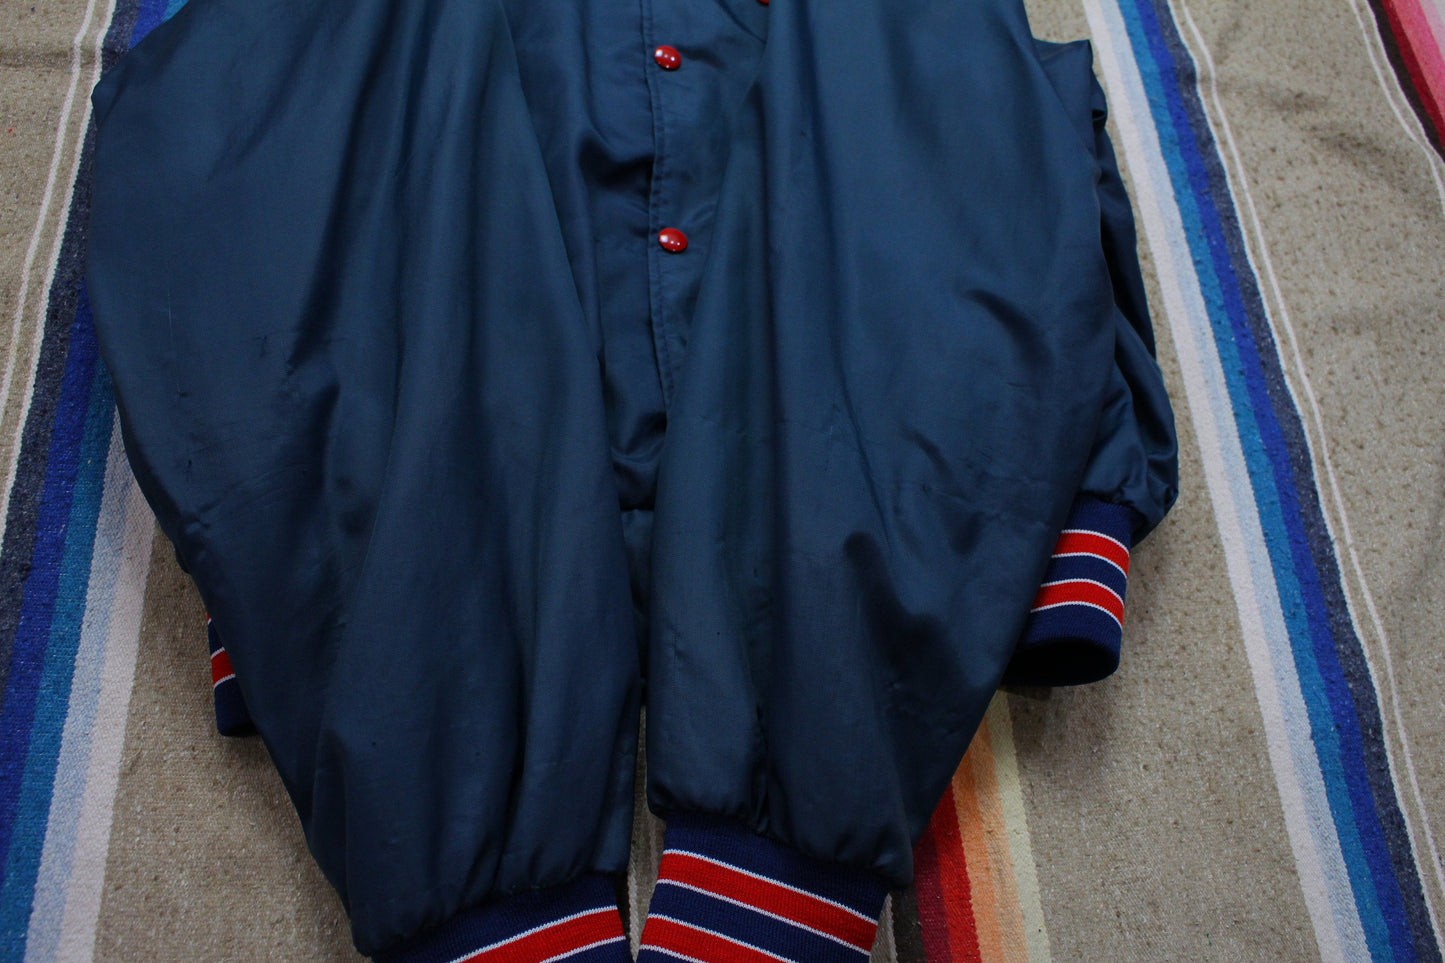 1990s Holloway Quality Forms Nylon Bomber Jacket Made in USA Size XL